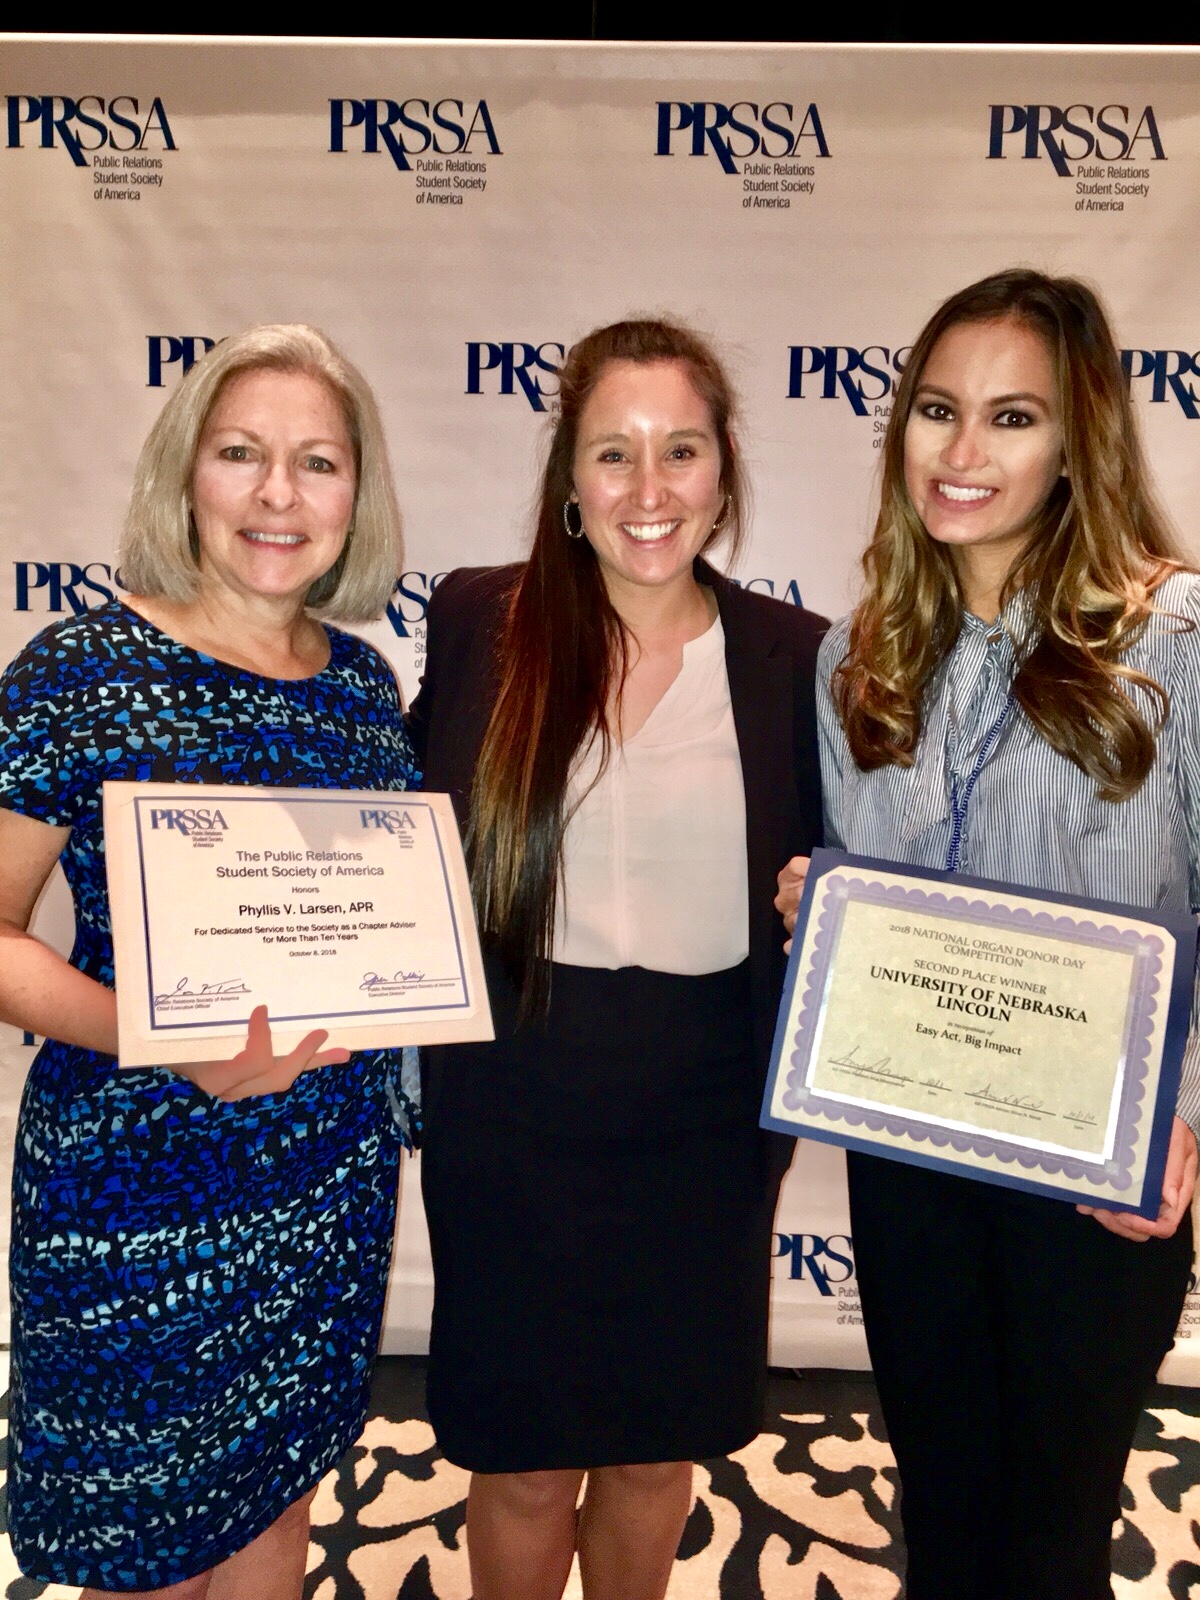 (from left) Prof. Phyllis Larsen, PRSSA President Paige Stanard, and Christina Neary, PRSSA Director of Public Relations and NODAC team member represented UNL at the 2018 PRSSA National Conference.